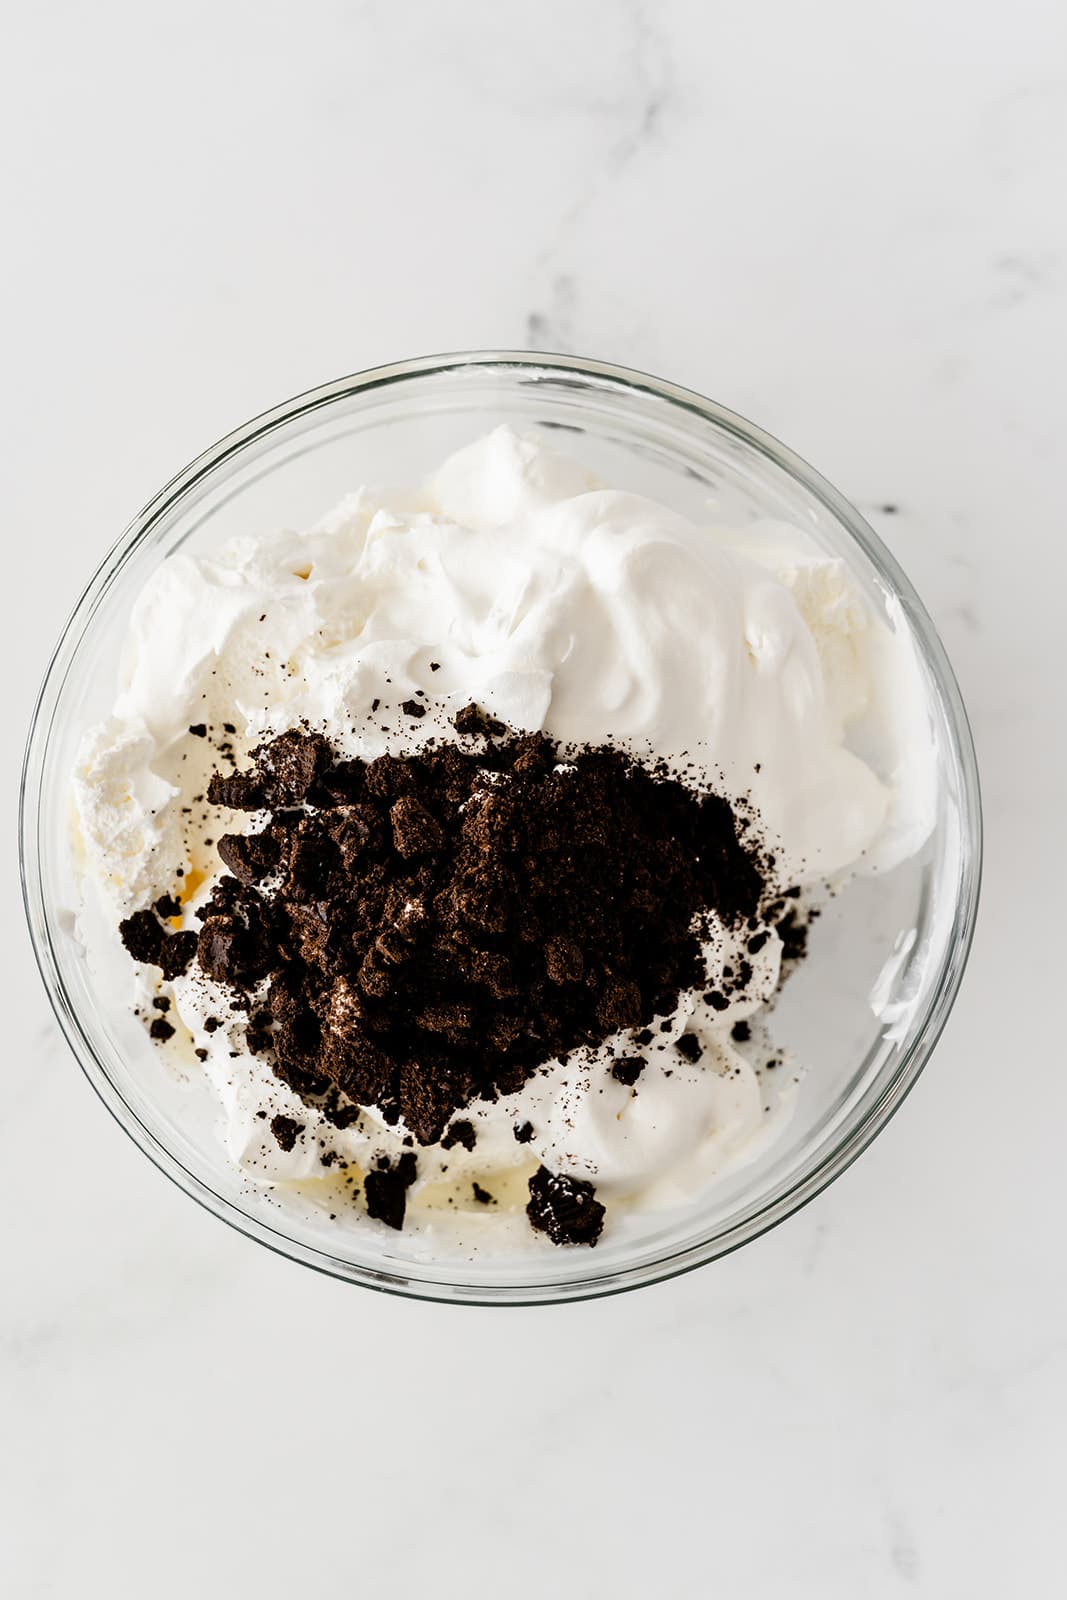 crushed Oreos and cool whip in a glass bowl